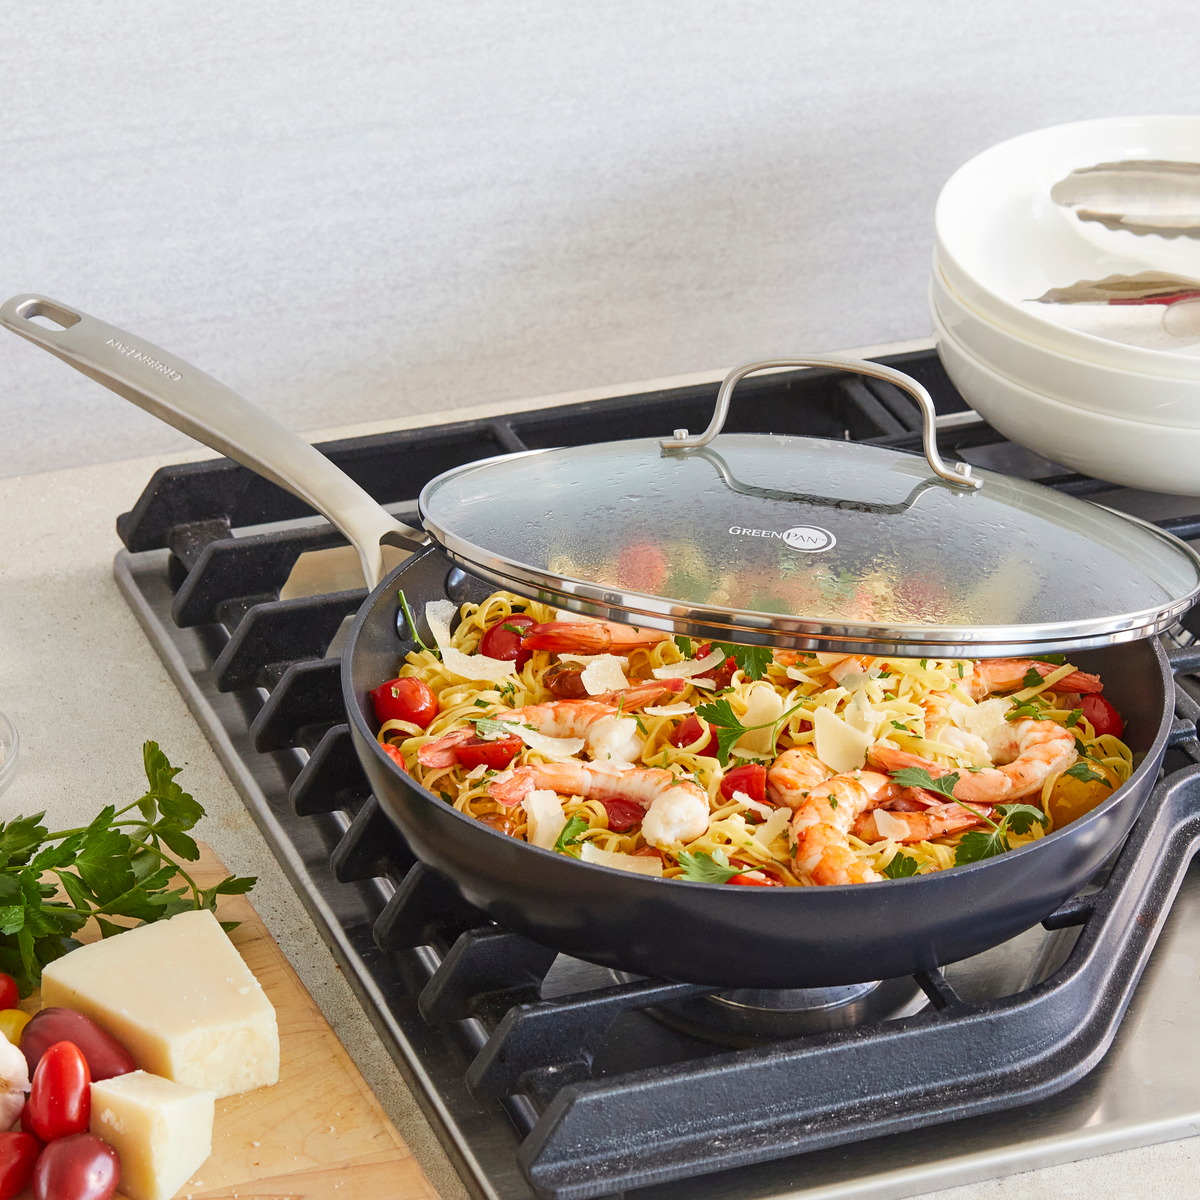 We tried the GreenPan one pot cooker to see if it's worthy of space on your  kitchen worktop